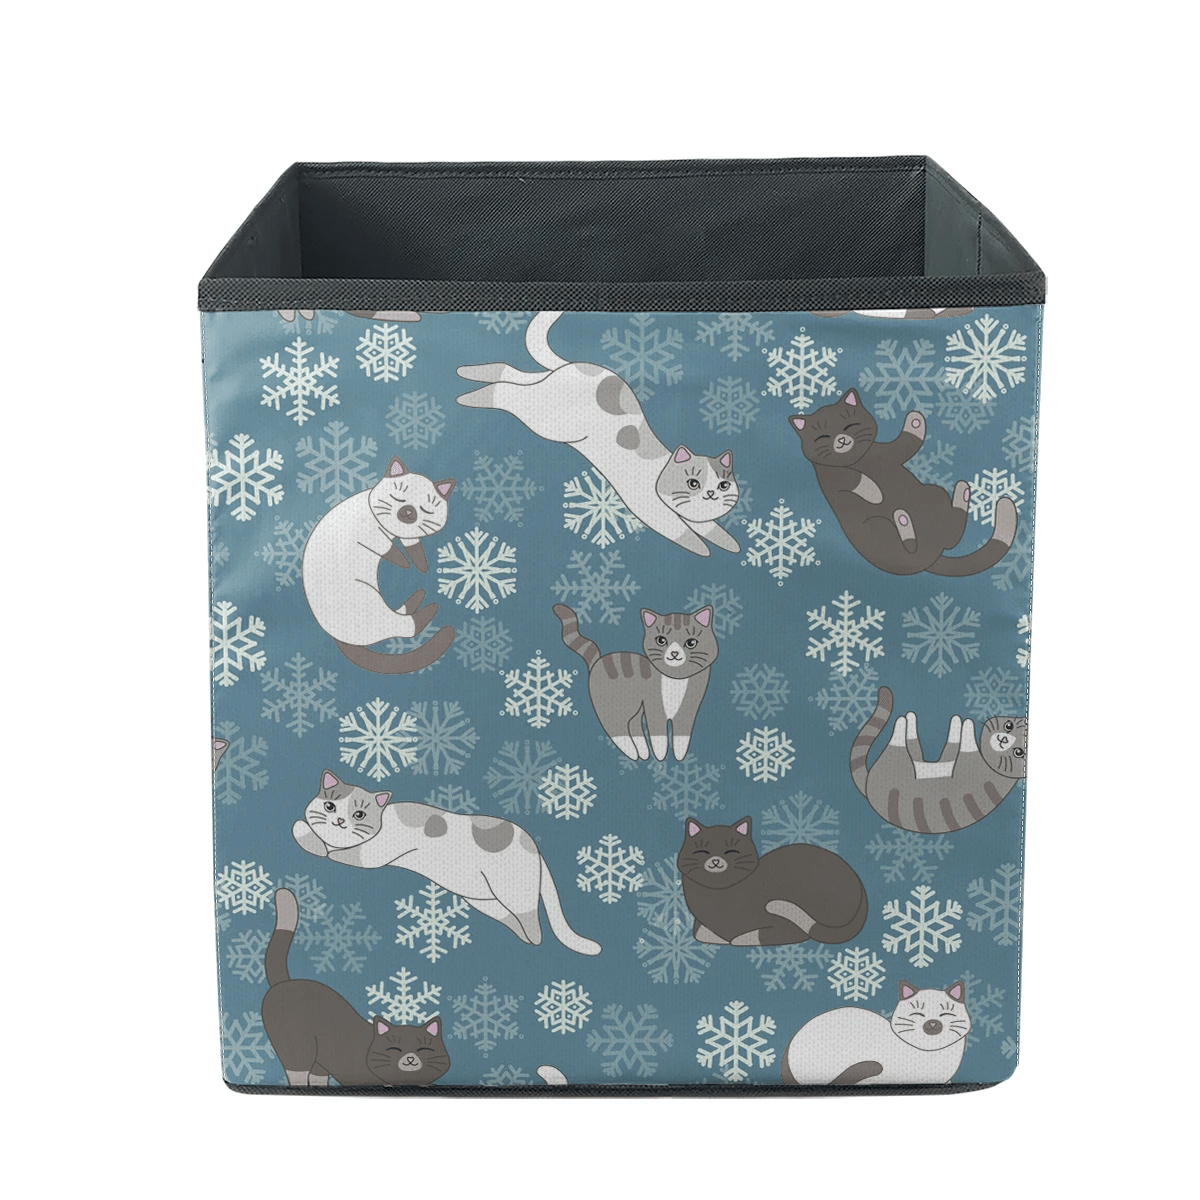 Sleeping And Playing Kittens Snowflakes On Blue Background Storage Bin Storage Cube